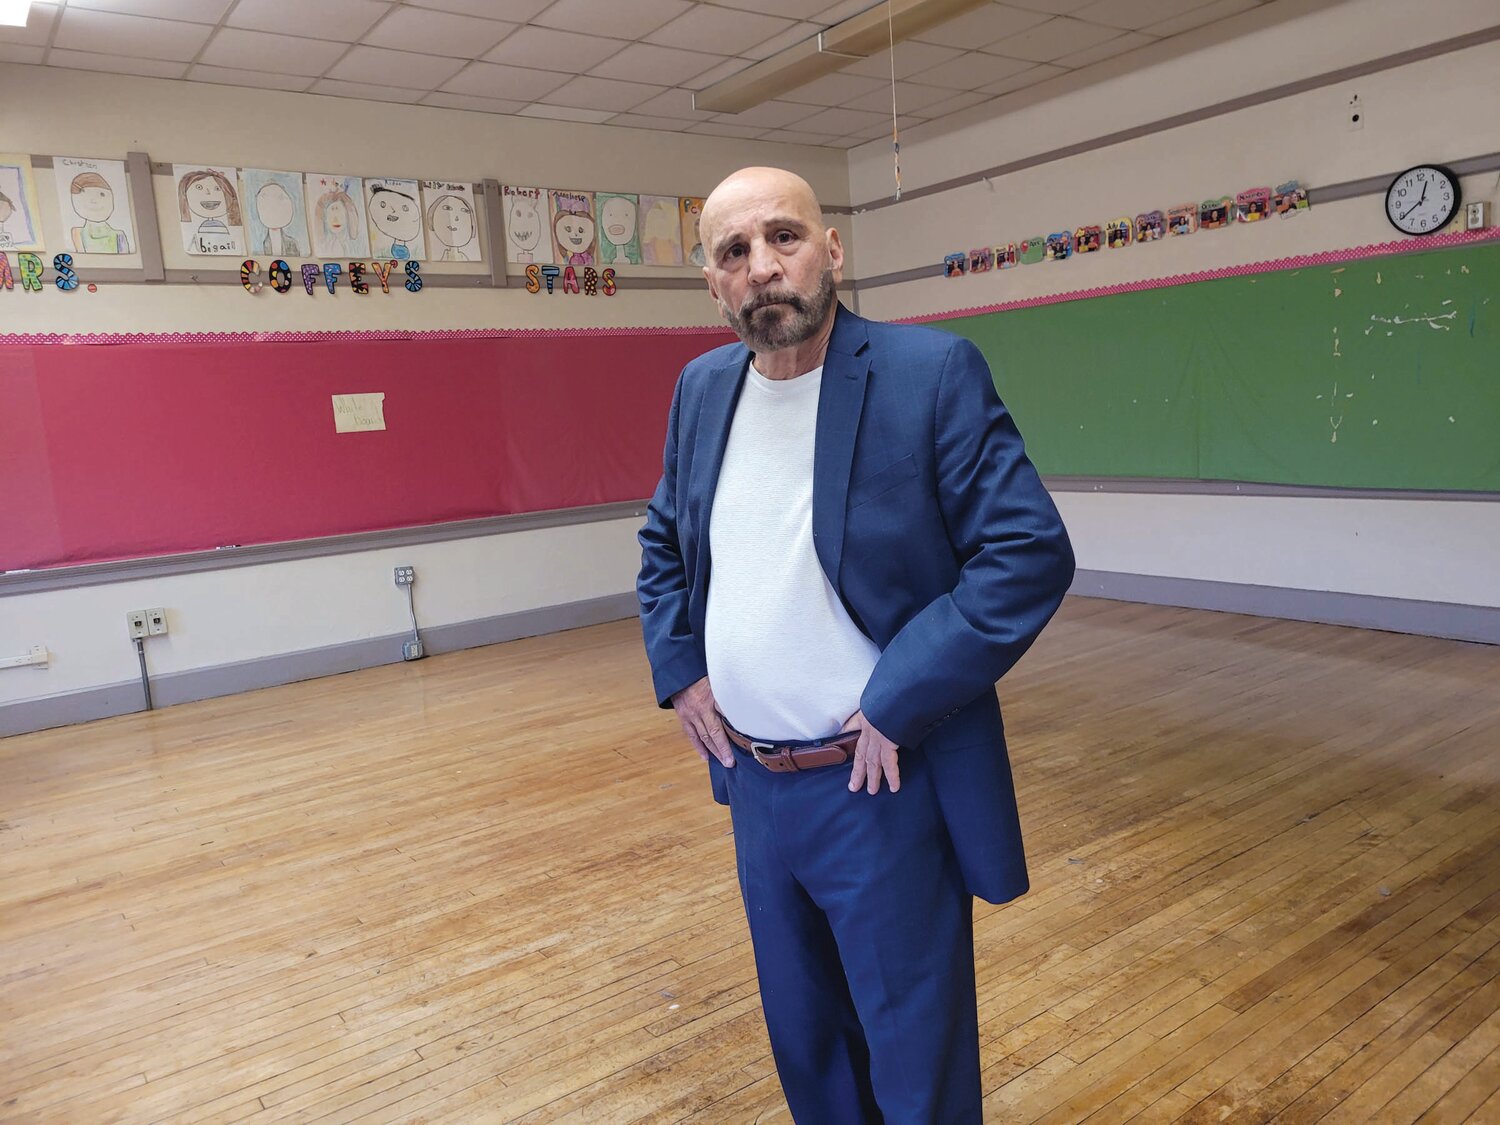 NEW DIGS: Tri-County President & CEO Joe DeSantis recently gave a tour of the agency’s newest acquisition, Johnston’s George C. Calef Elementary School. Tri-County paid the town $1 million in cash for the building.